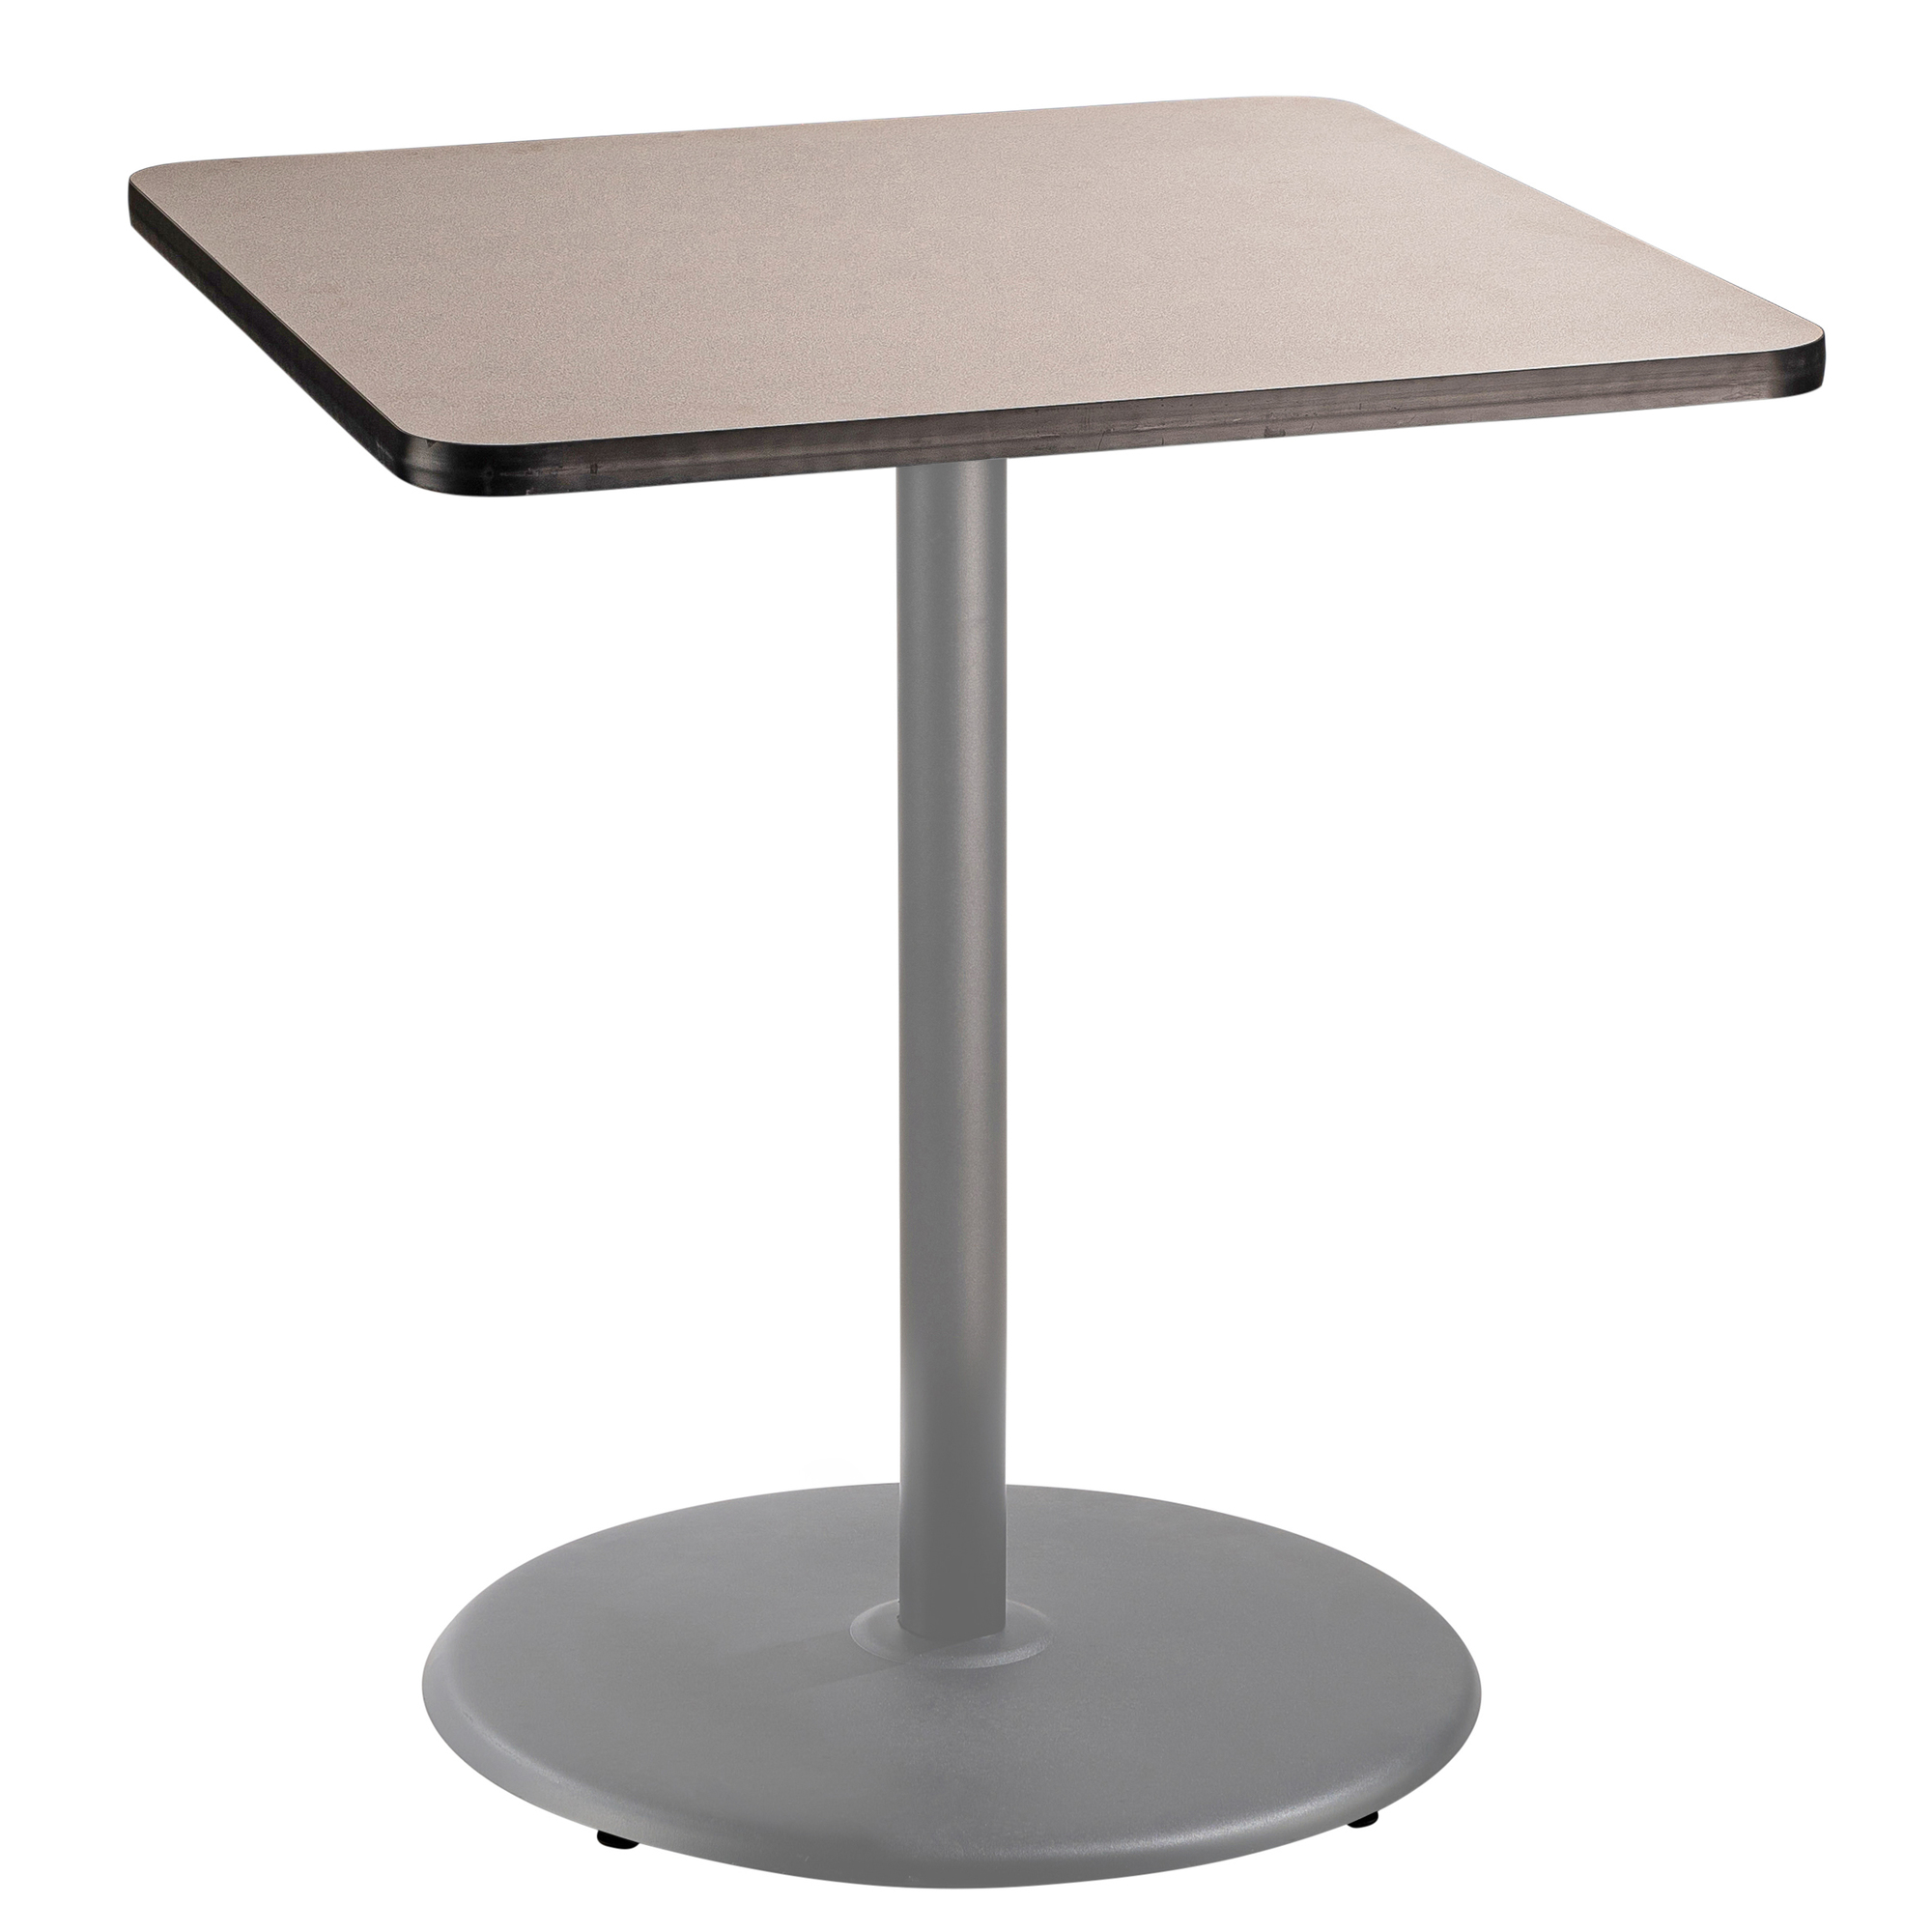 Cafe Table, 36x36x42Square """"R"""" Base, Height 42 in, Model - National Public Seating CTG33636RBPBTMGY